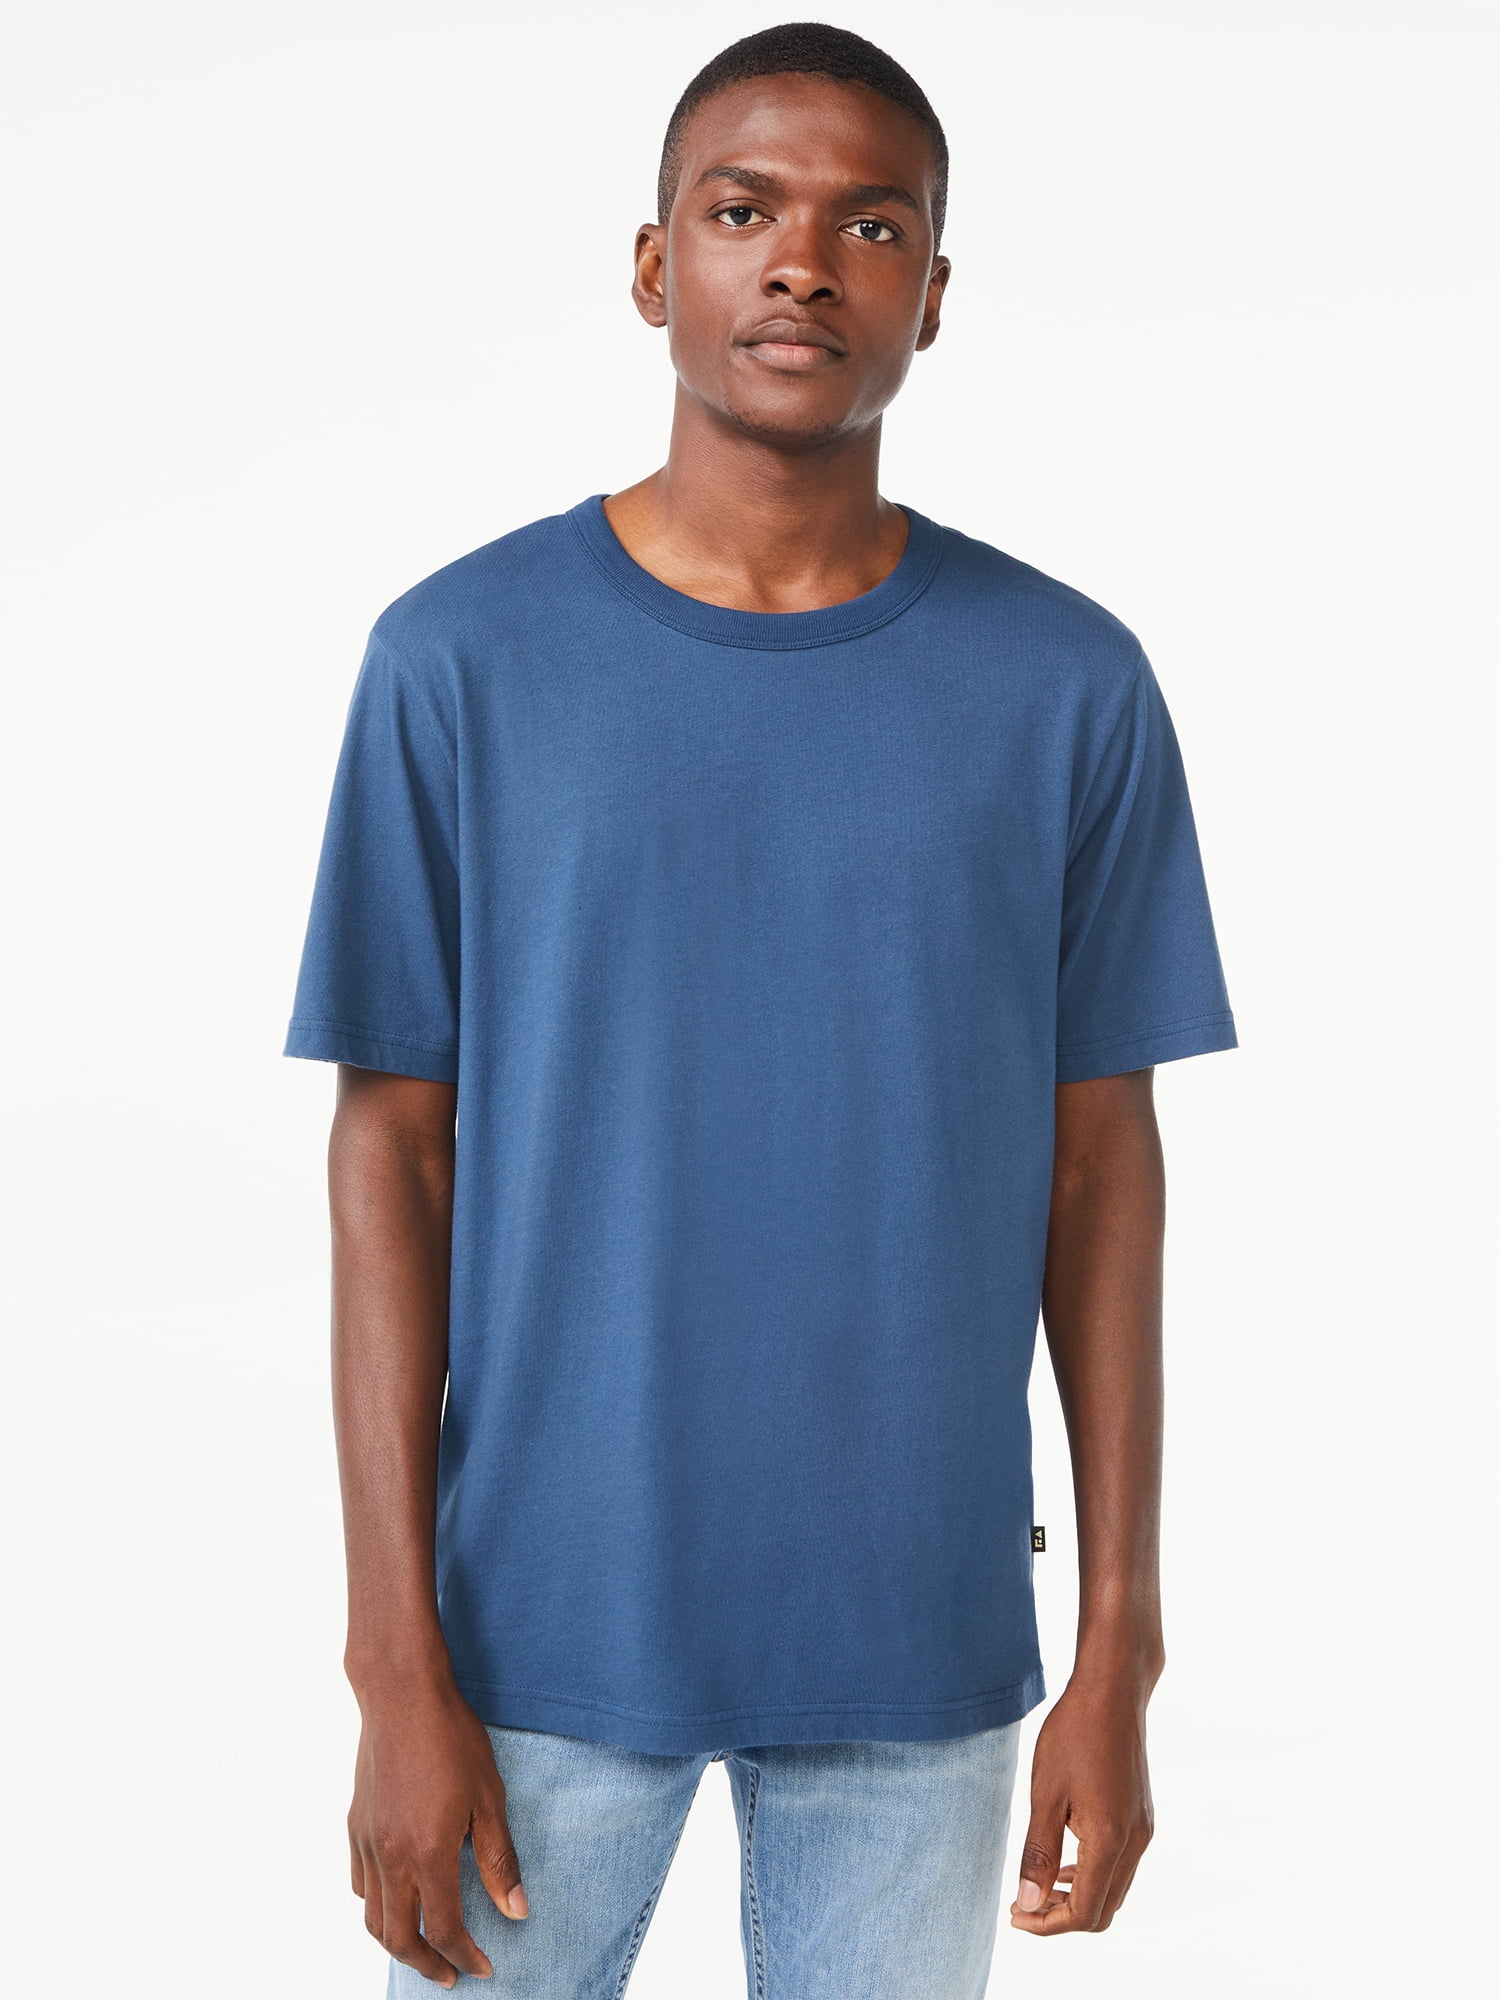 Free Assembly Men's Everyday Tee with Short Sleeves, Sizes XS-3XL